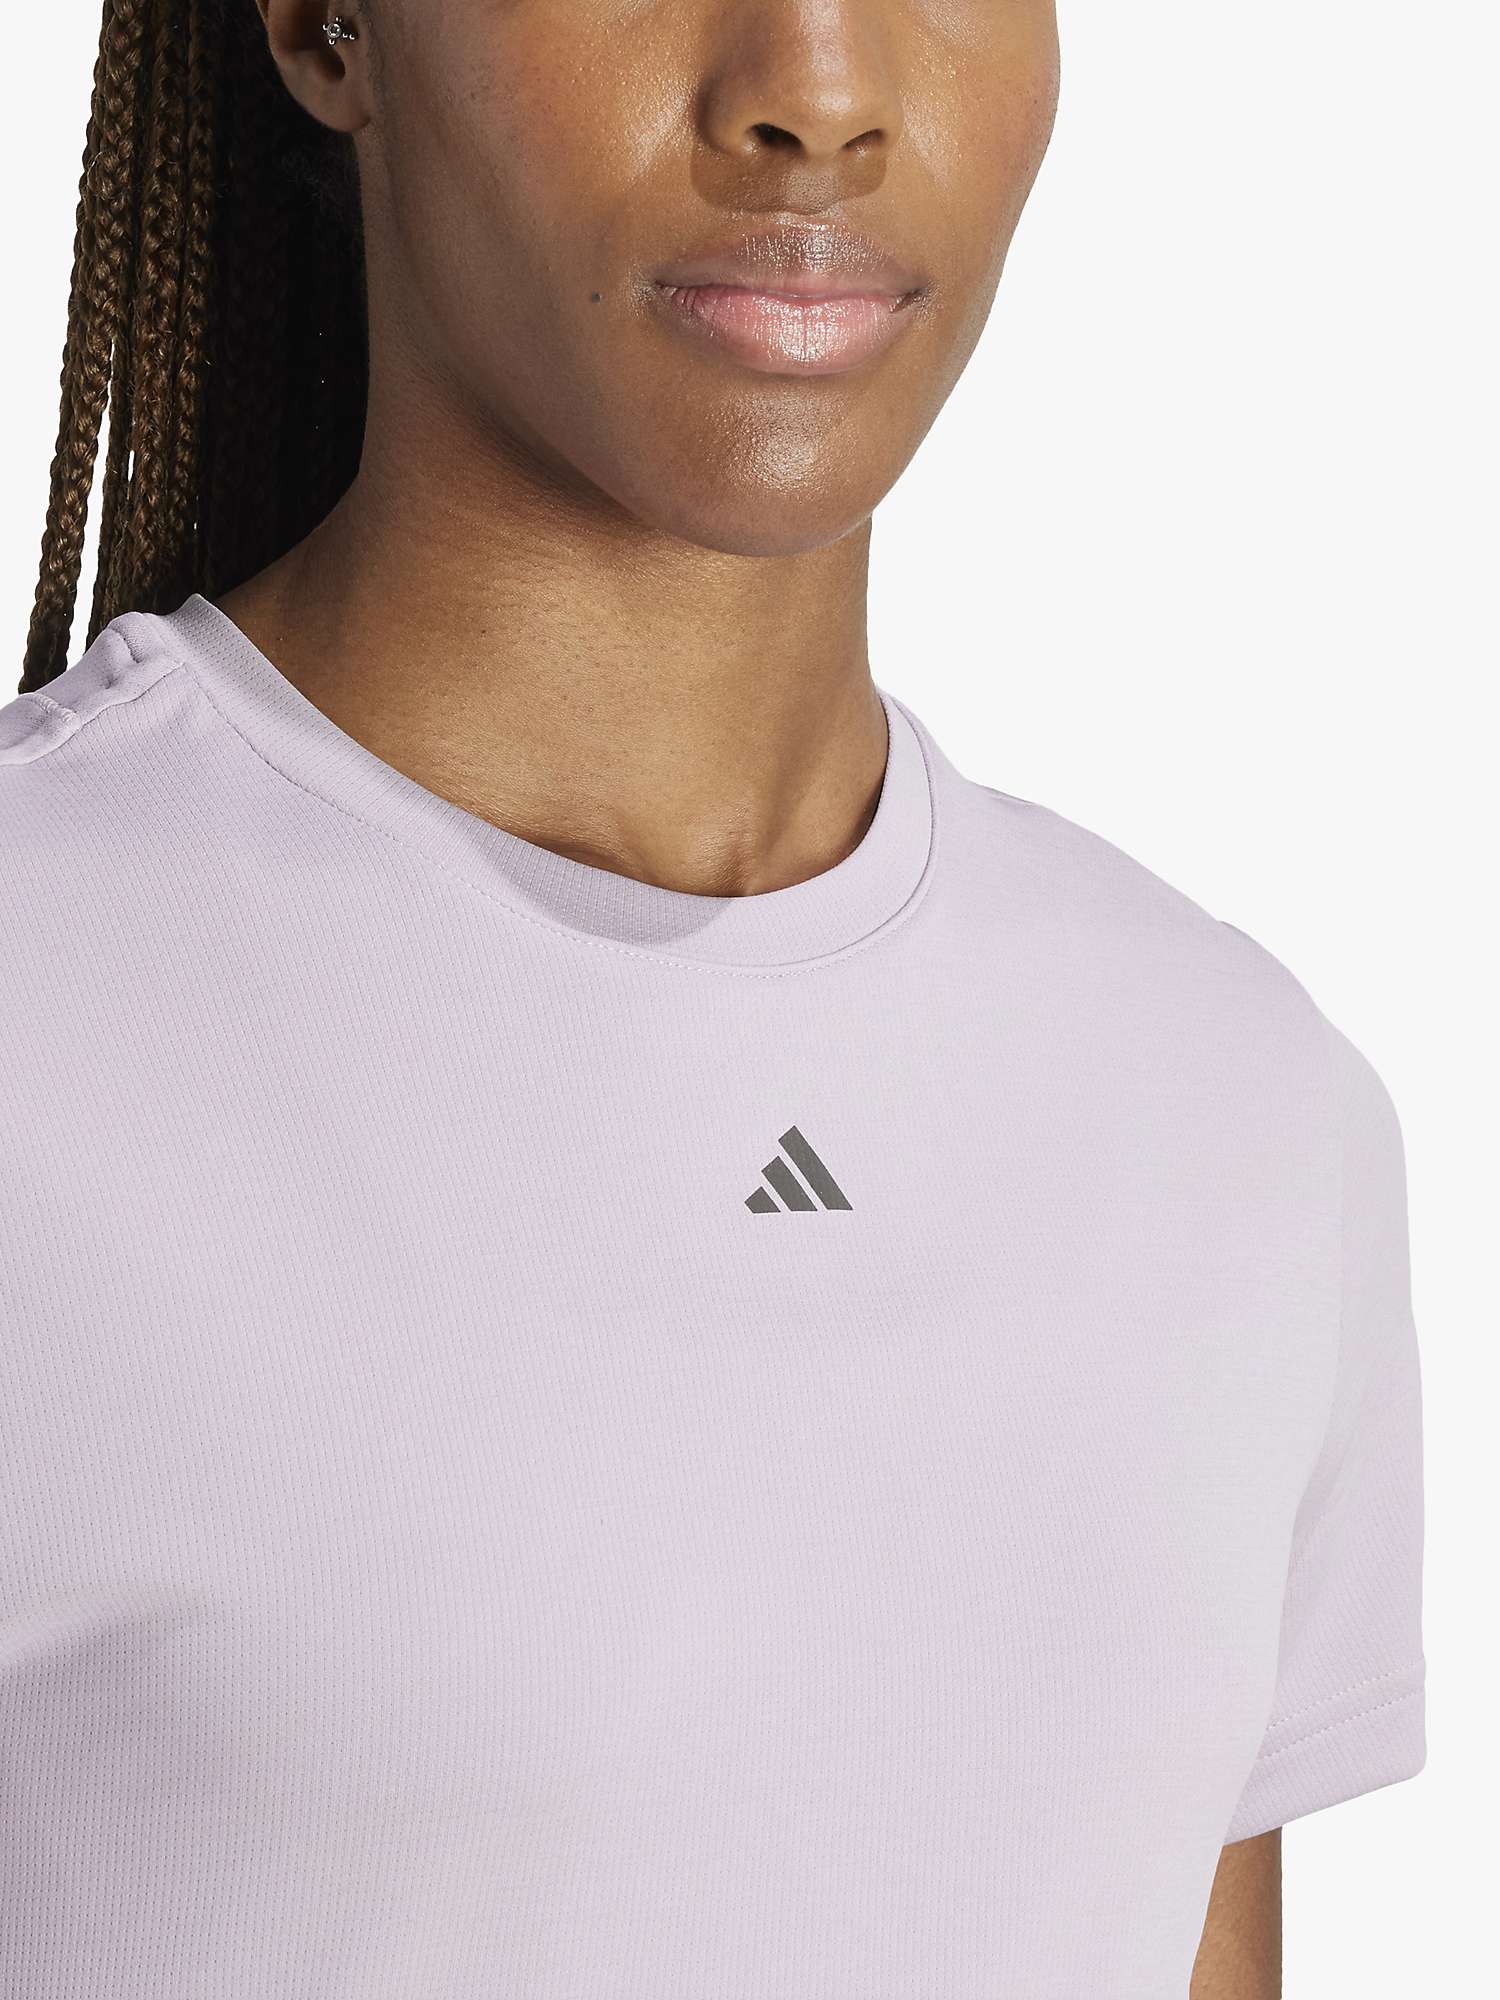 Buy adidas HEAT.RDY HIIT T-Shirt, Preloved Fig Online at johnlewis.com